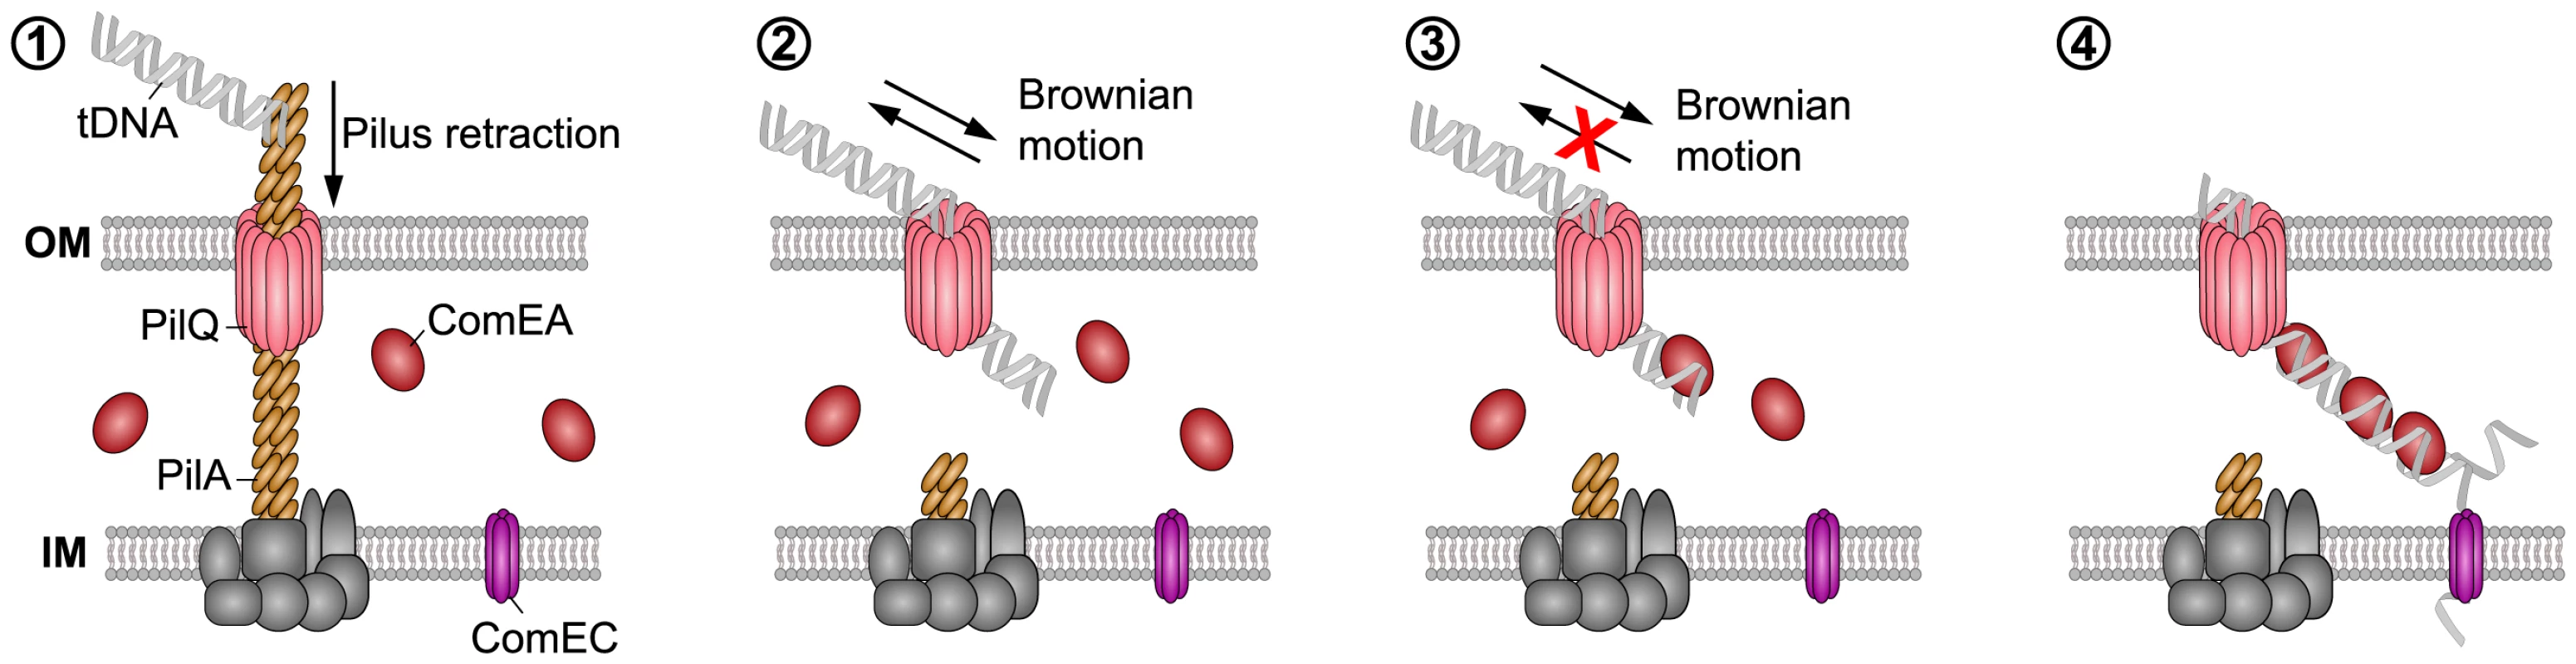 Working model of how DNA translocation across the outer membrane might occur in <i>V. cholerae</i>